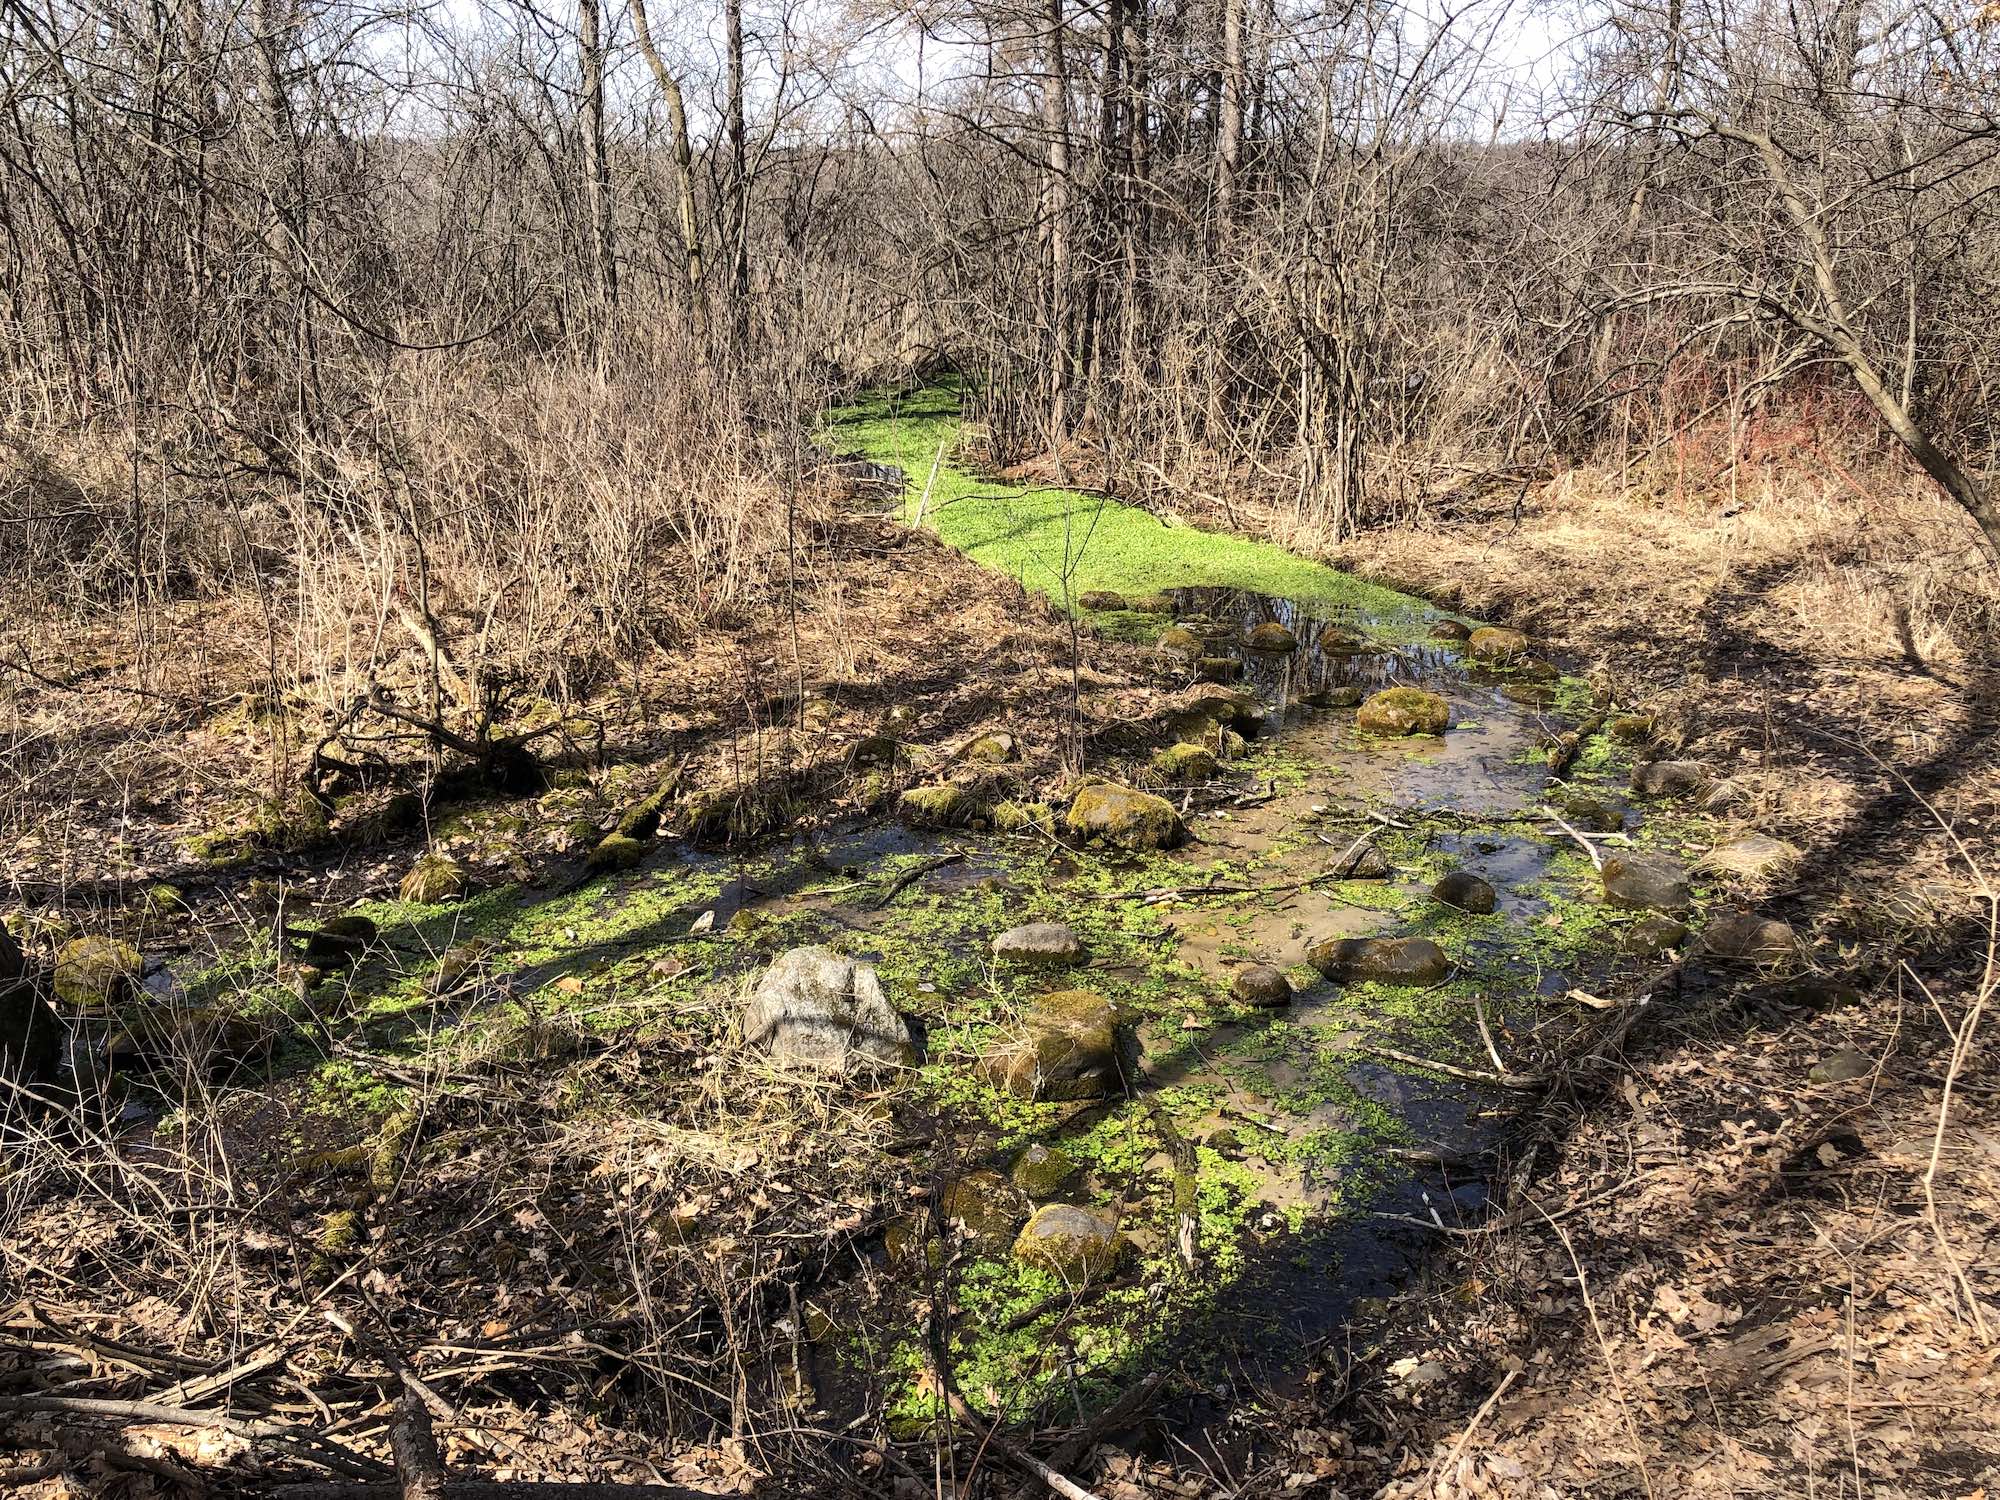 White Clay Spring flowing into Lake Wingra in the University of Wisconsin Arboretum on March 26, 2019.